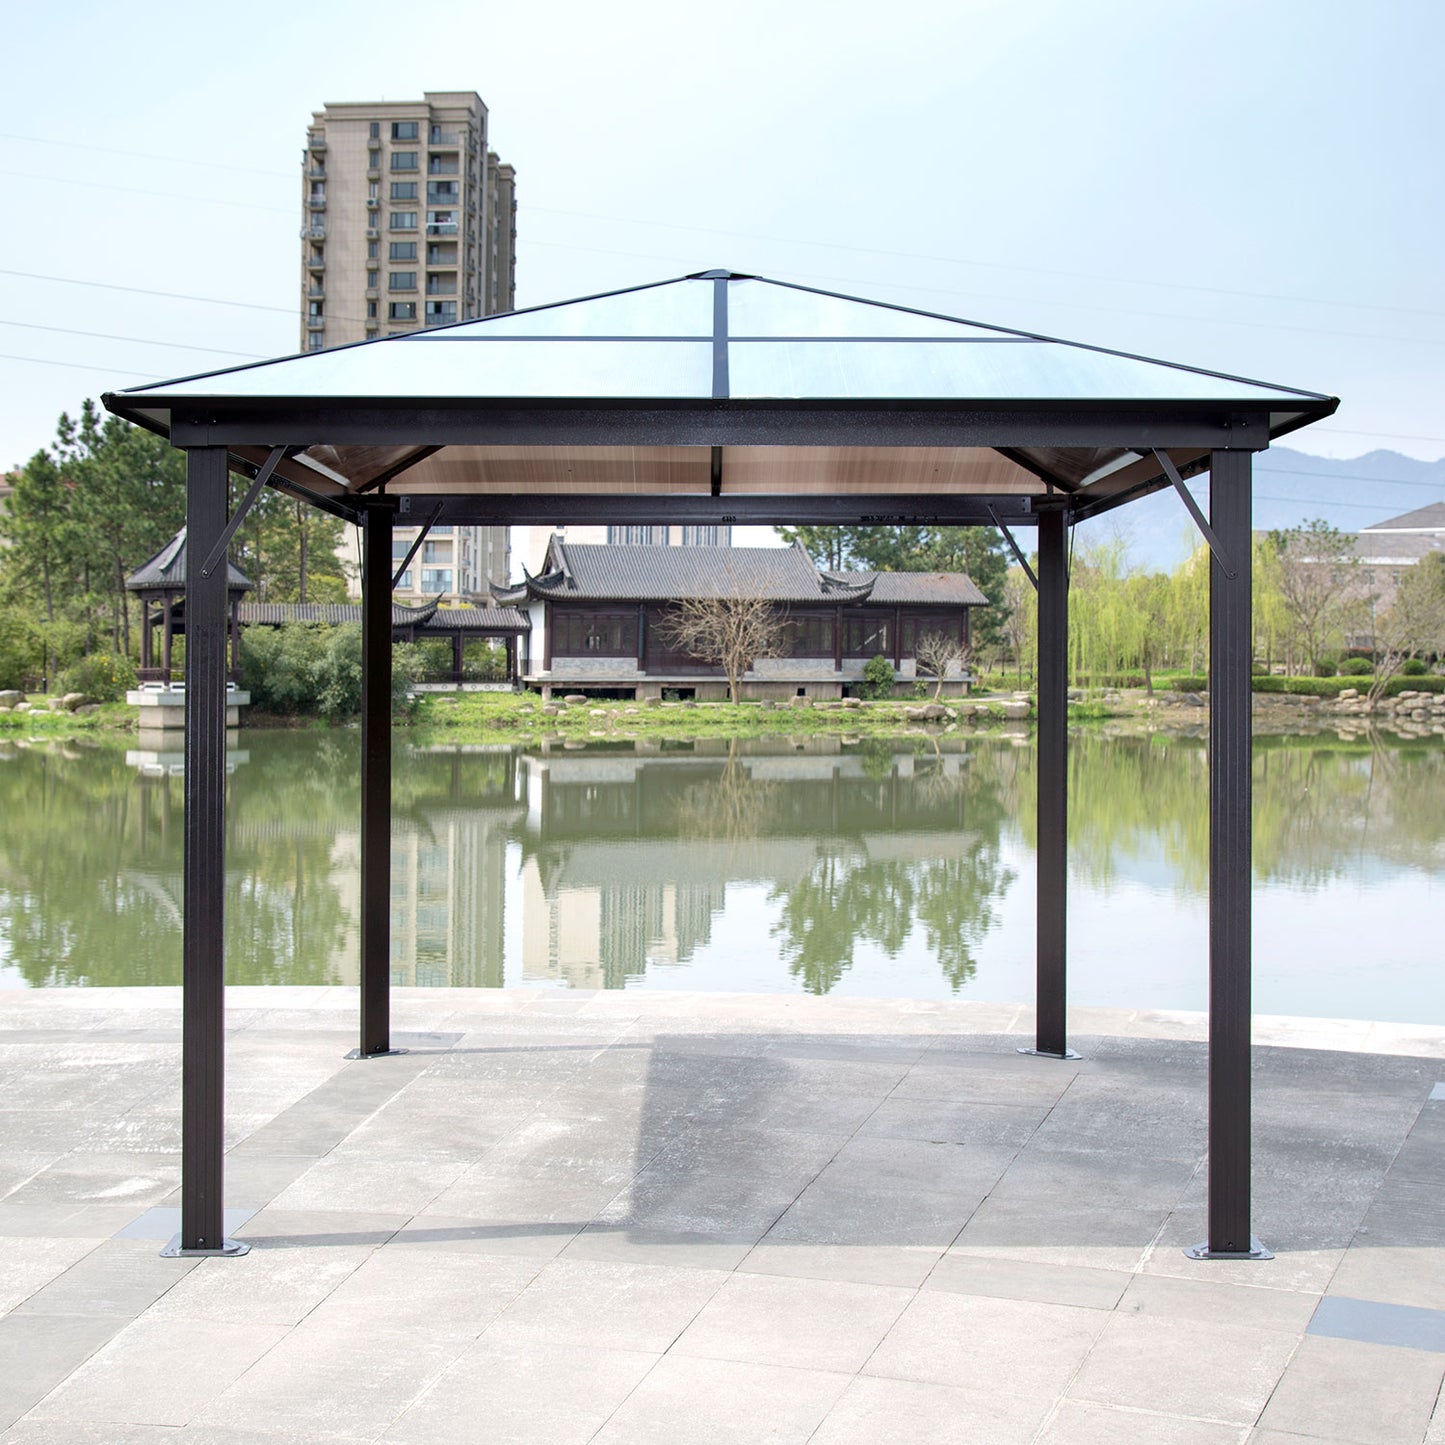 Aspen Taupe Gazebo with Polycarbonate Roof